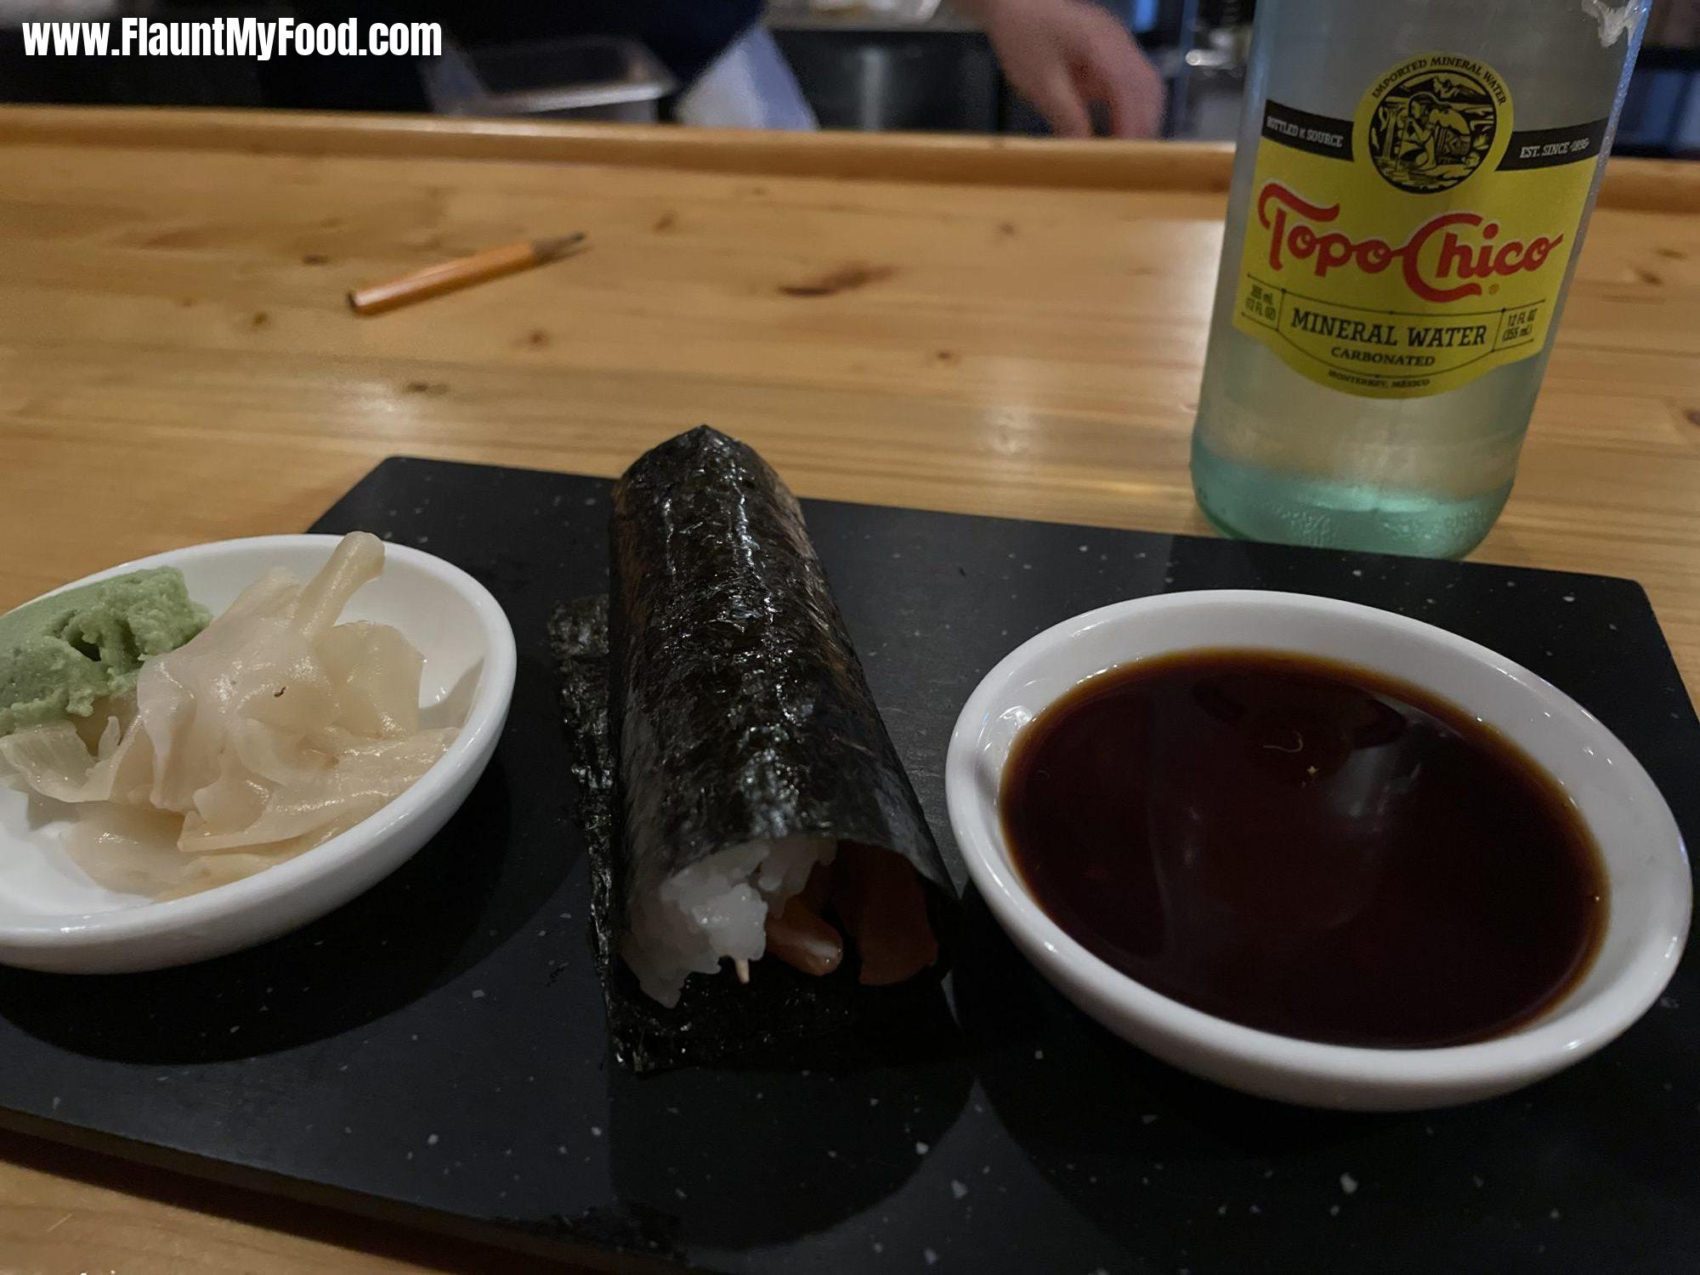 Salmon sushi hand roll at Hatsuyuki In Fort Worth Texas off West 7th street